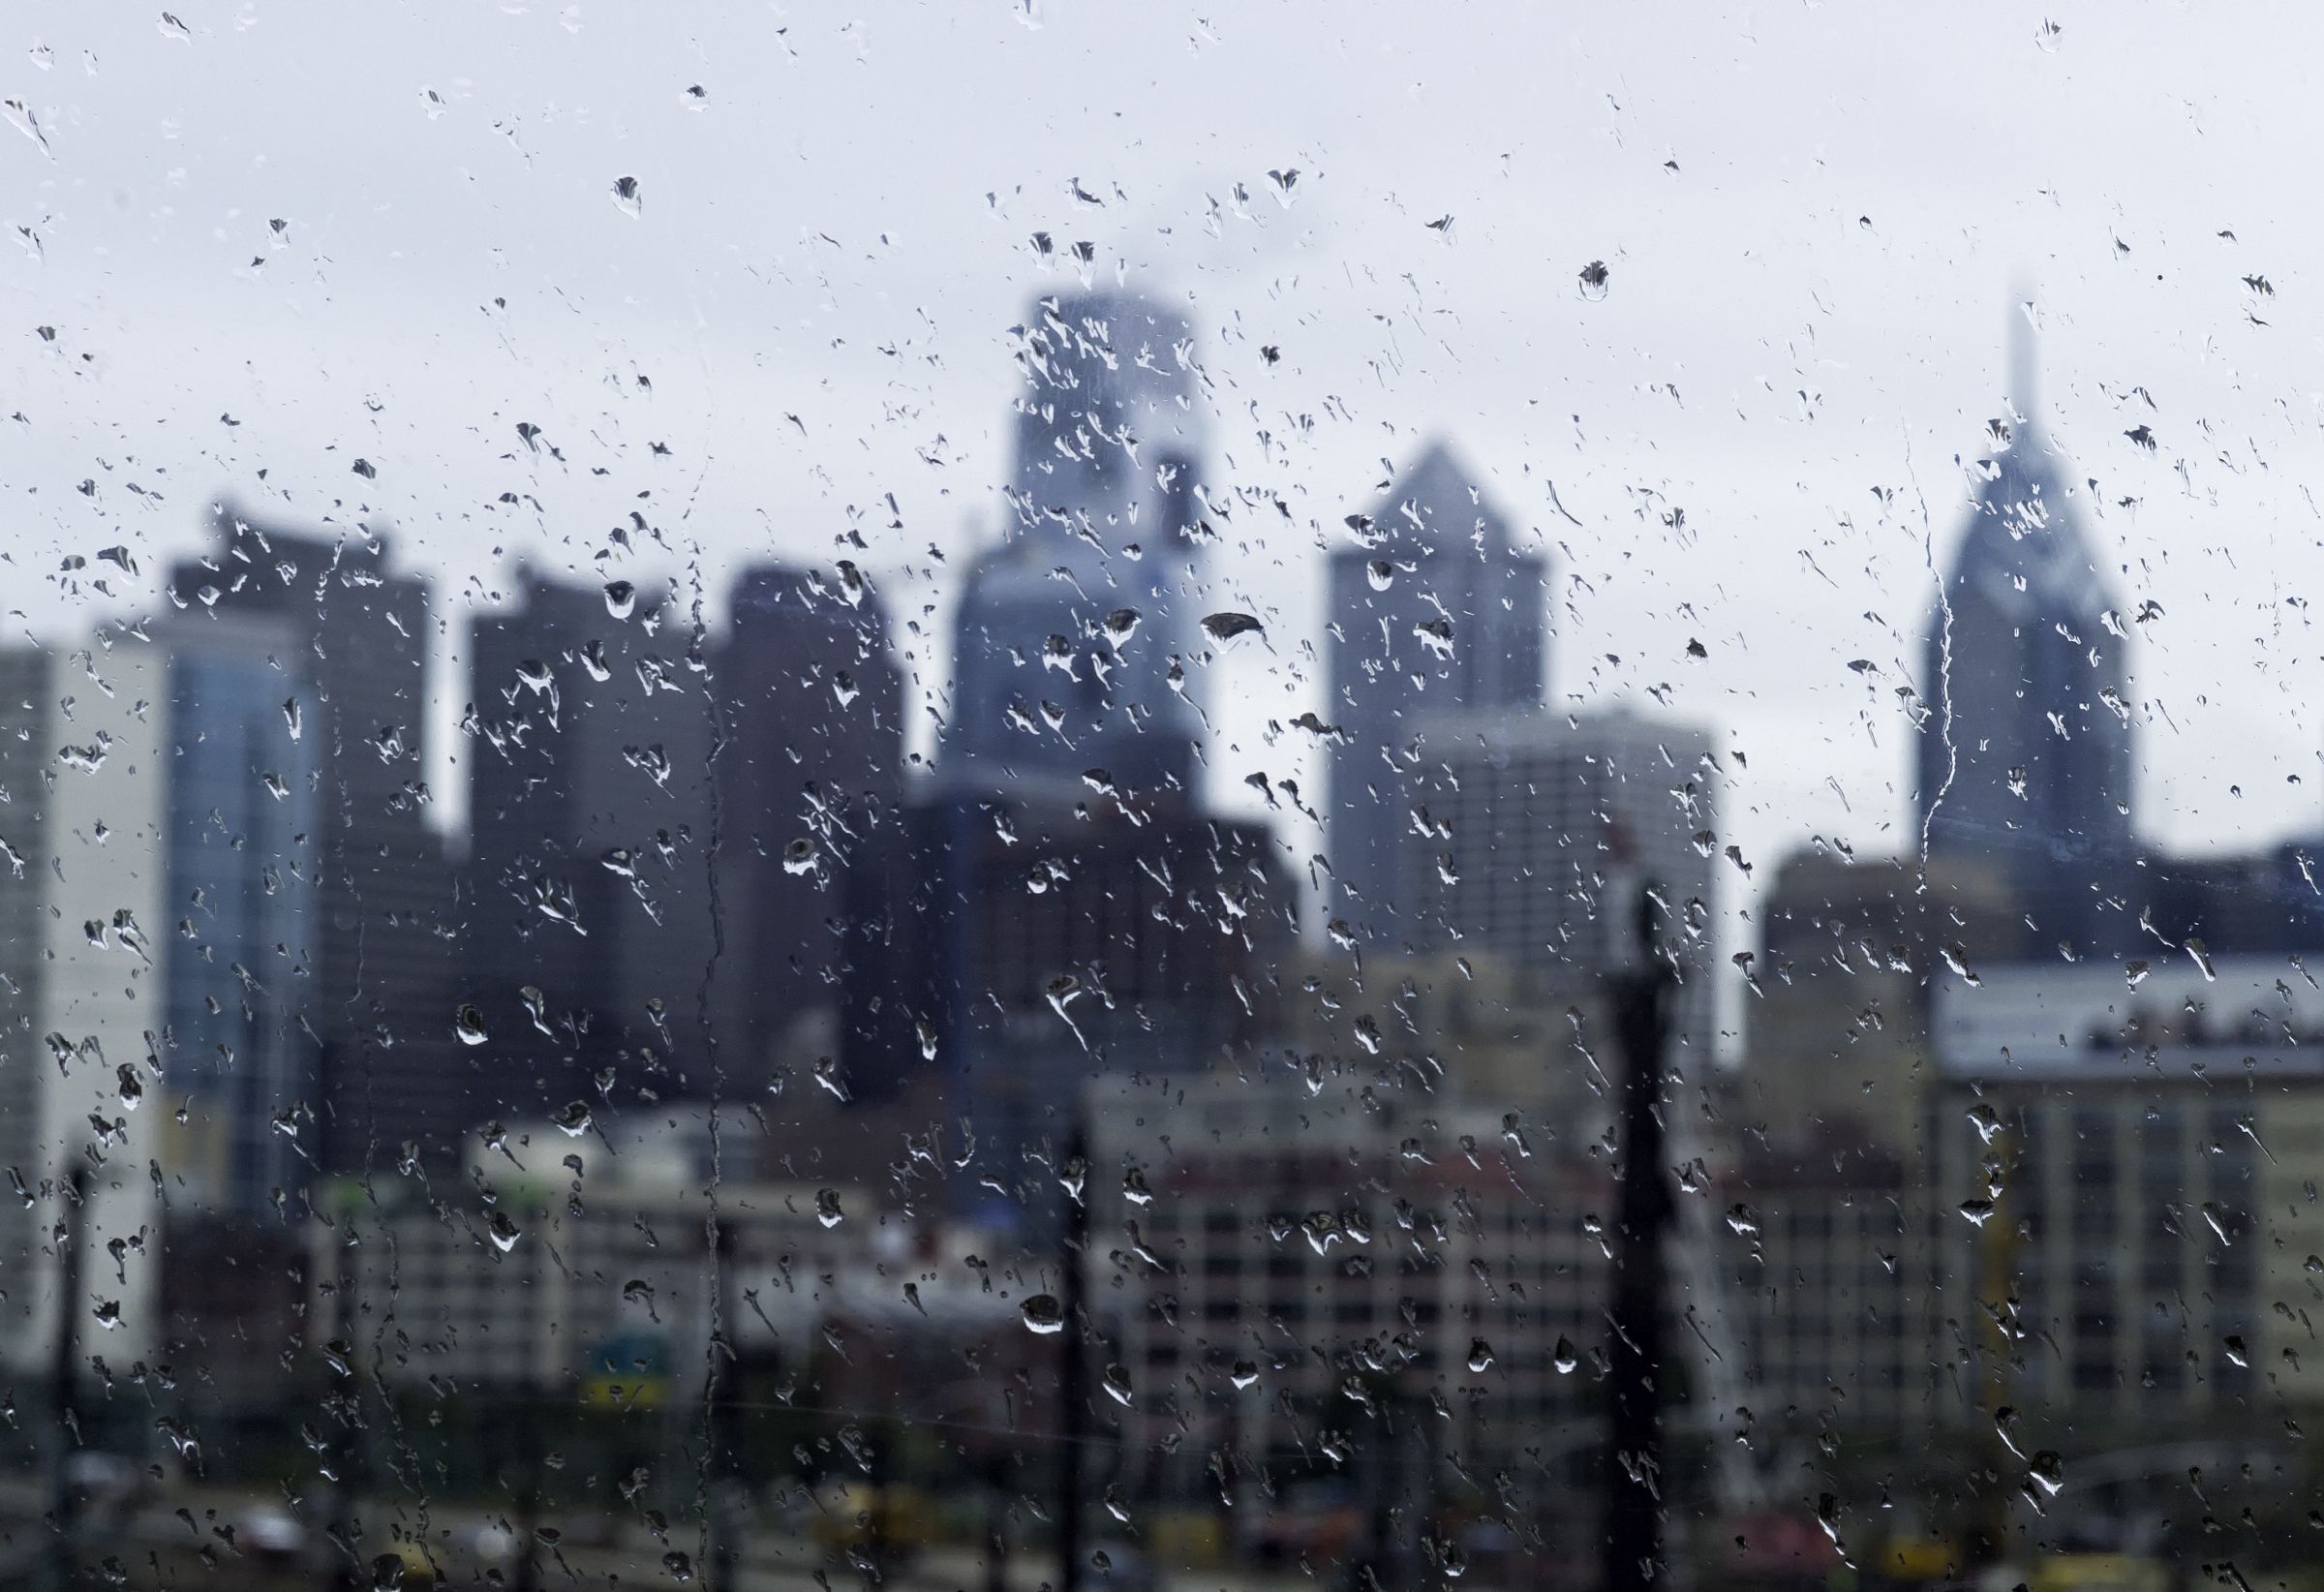 a view out a rain-spattered window, the Philadelphia skyline blurred in the background